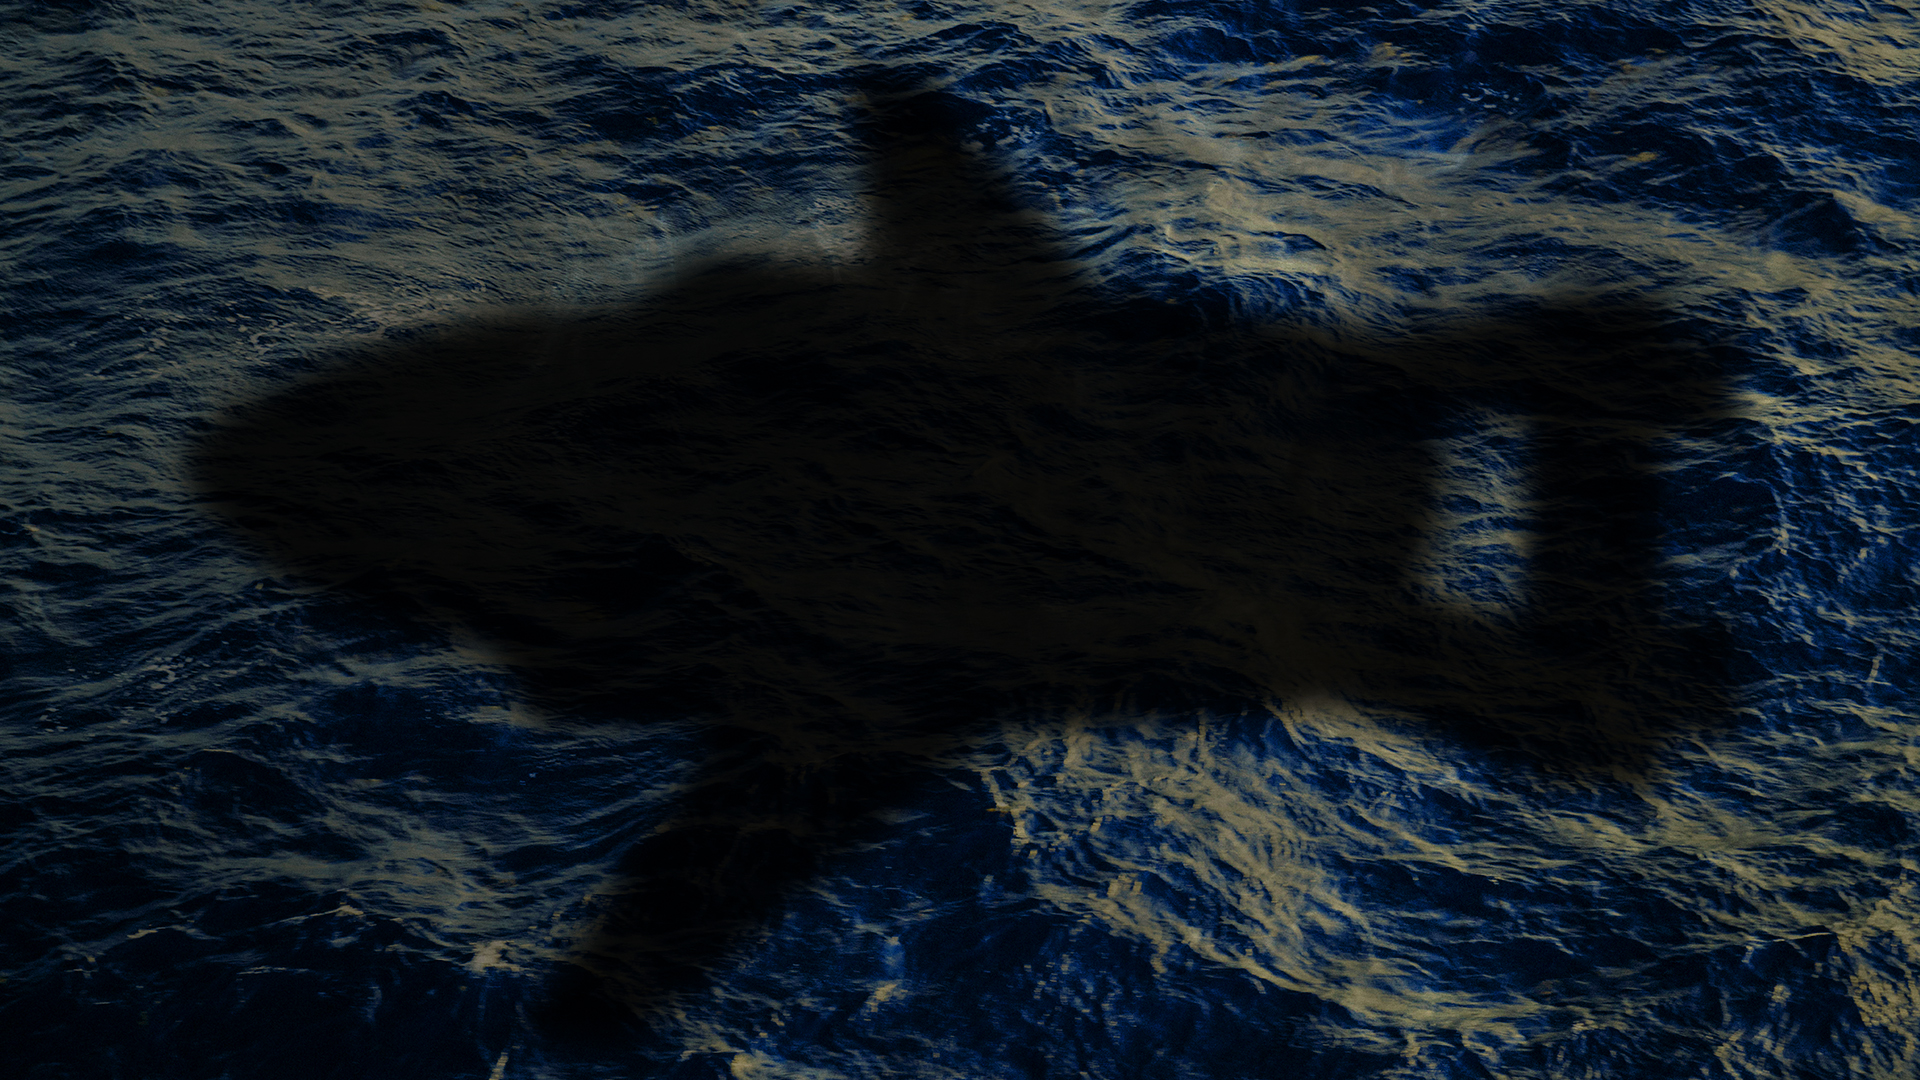 Silhouette of Internationl Rescue's giant transporter aircraft flying over the ocean.